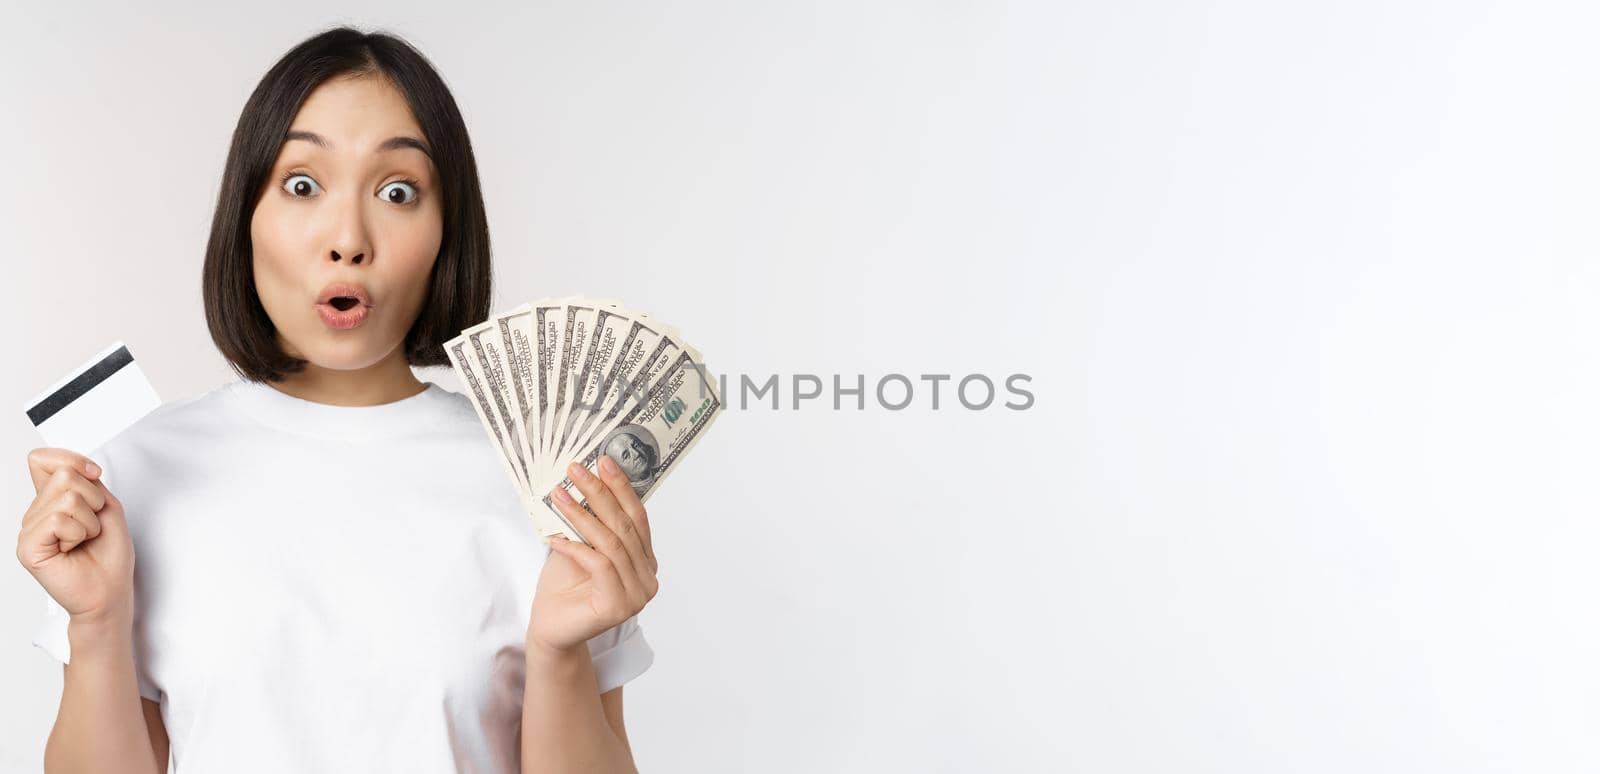 Portrait of asian woman holding money, dollars and credit card, looking impressed and amazed, standing in tshirt over white background.